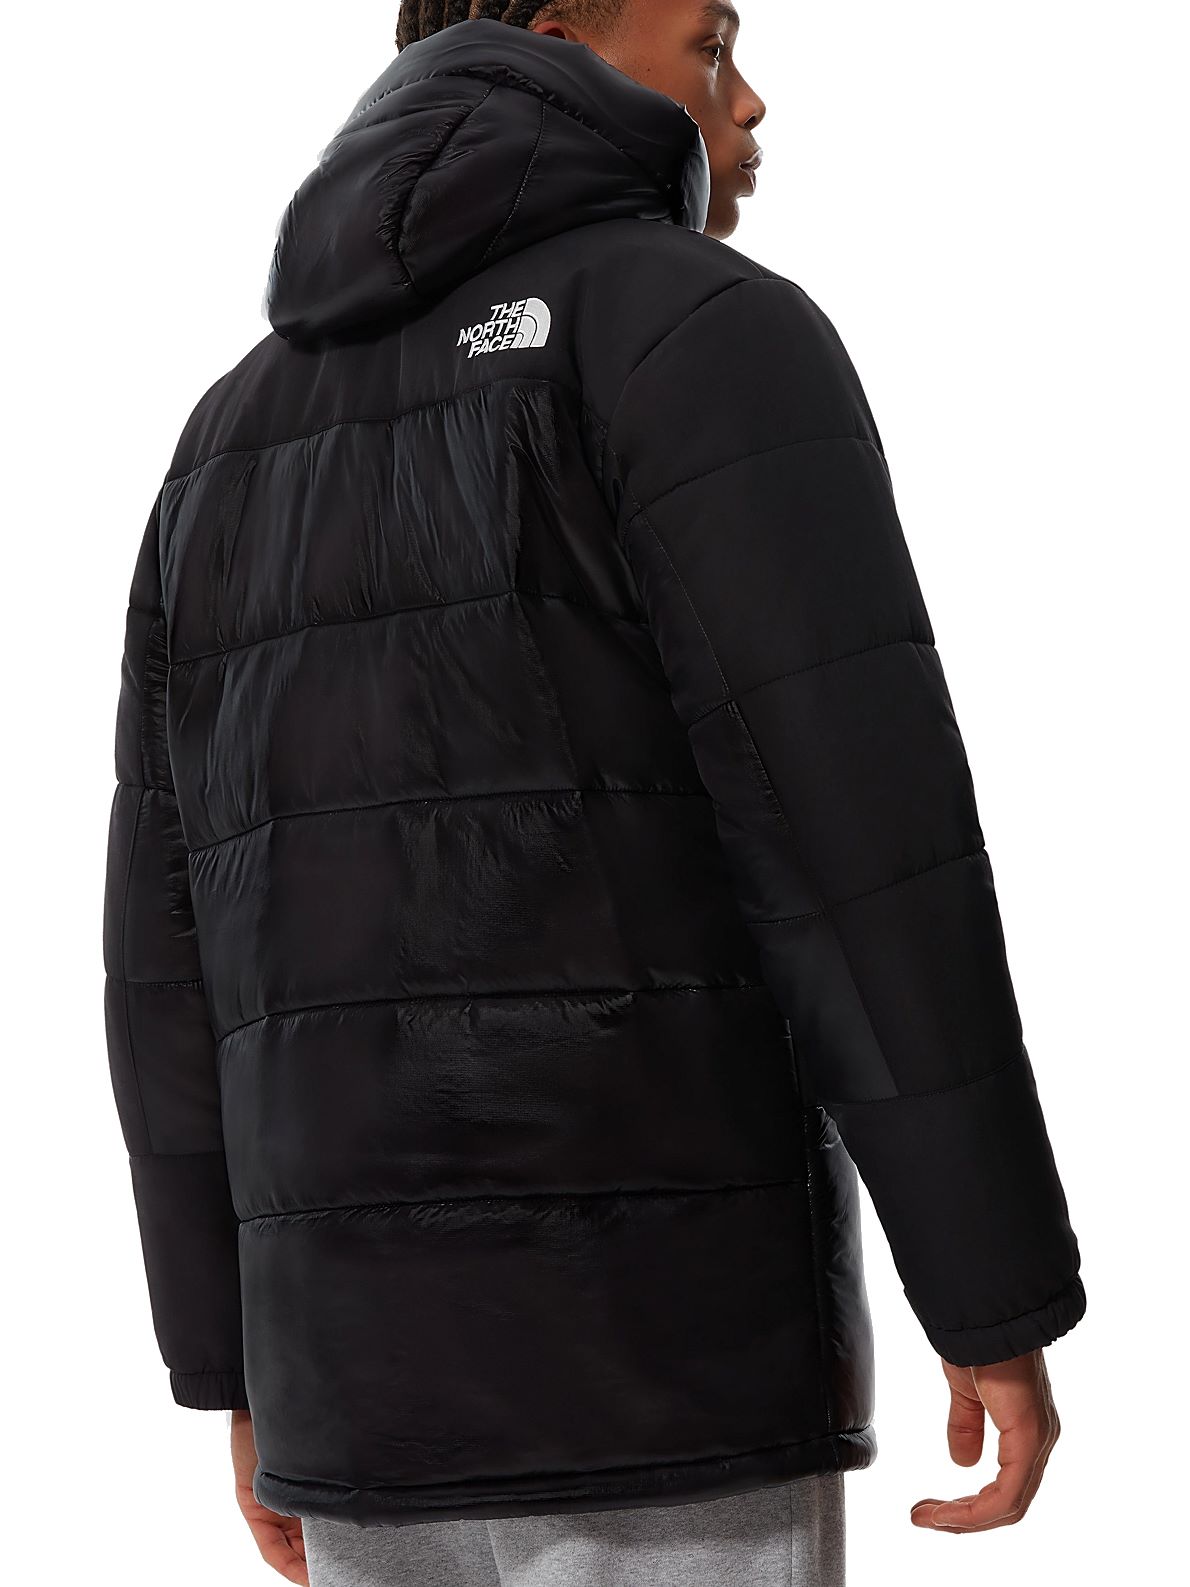 The North Face Men's Himalayan Insulated Parka in Black | Dapper Street